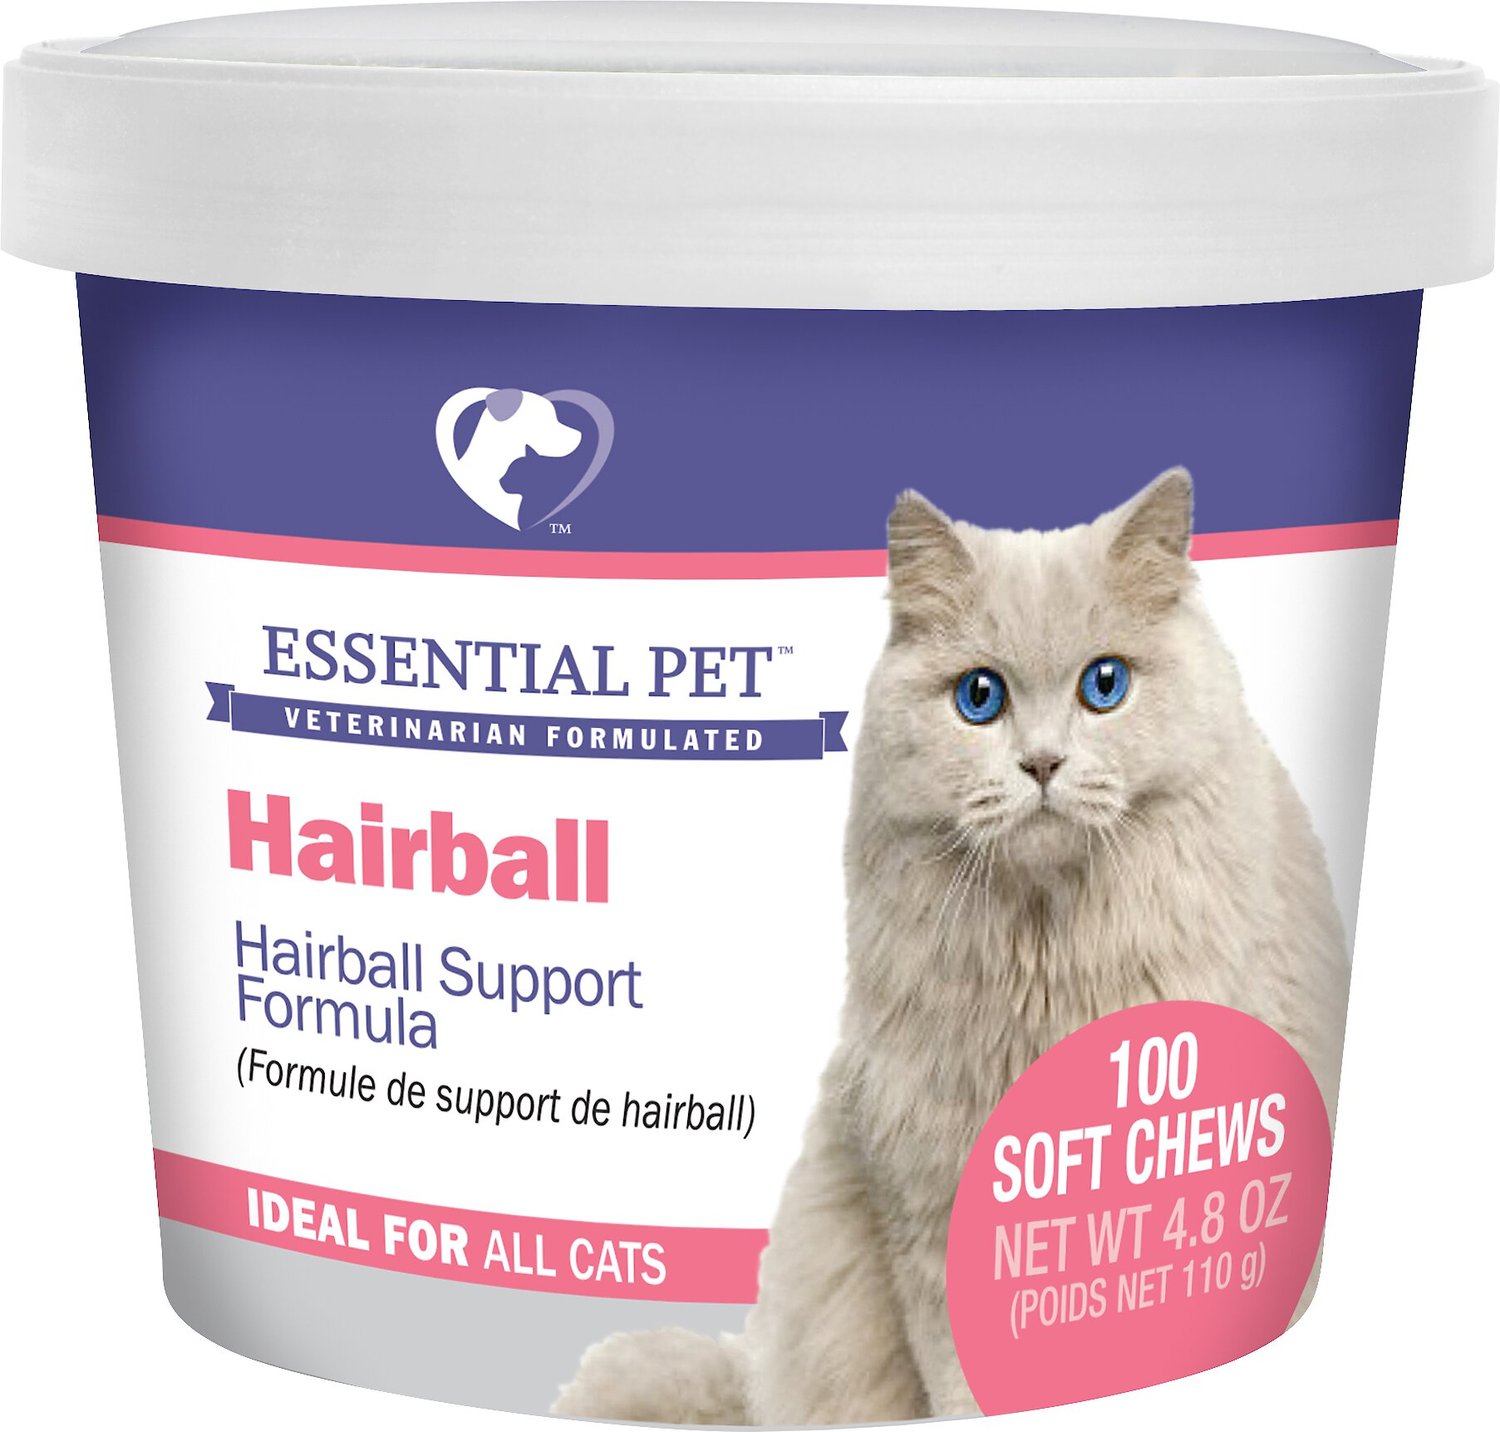 How To Help A Cat Pass A Hairball